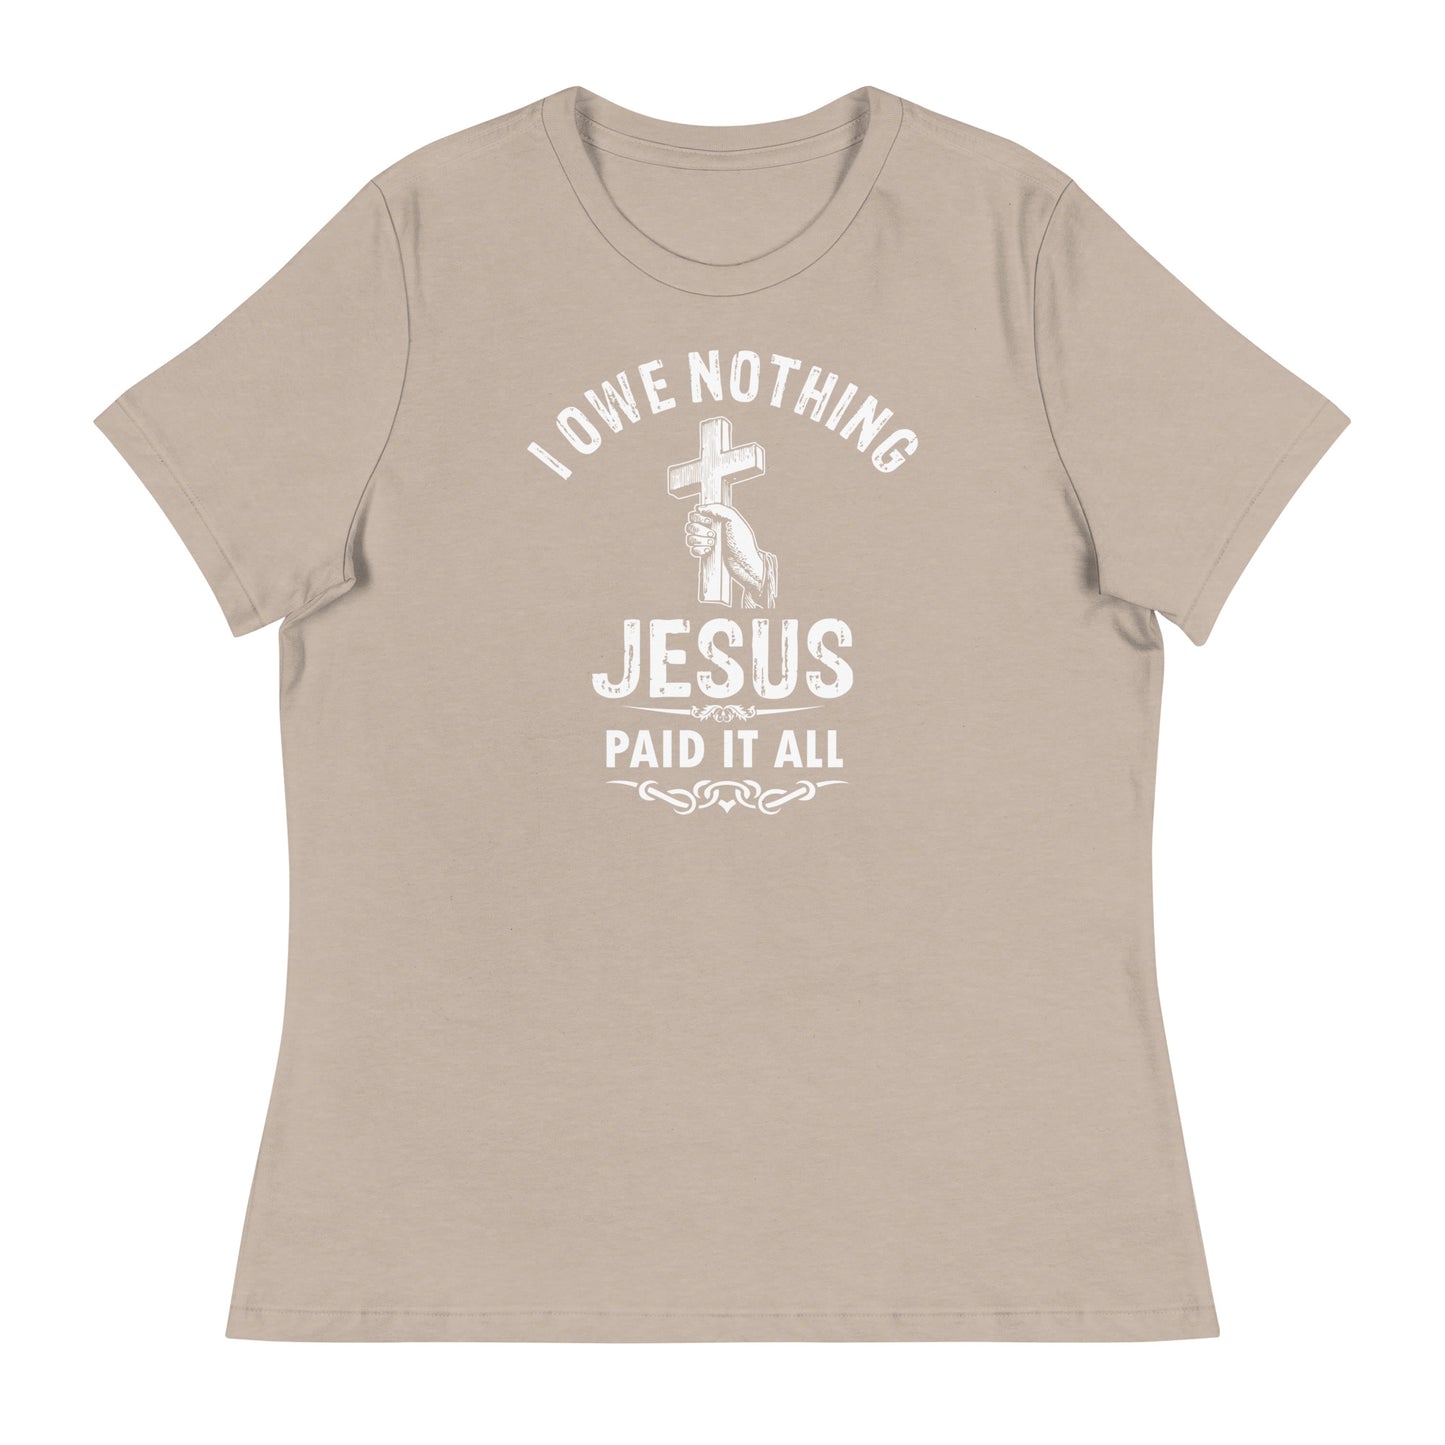 I Owe Nothing - Women's Relaxed T-Shirt